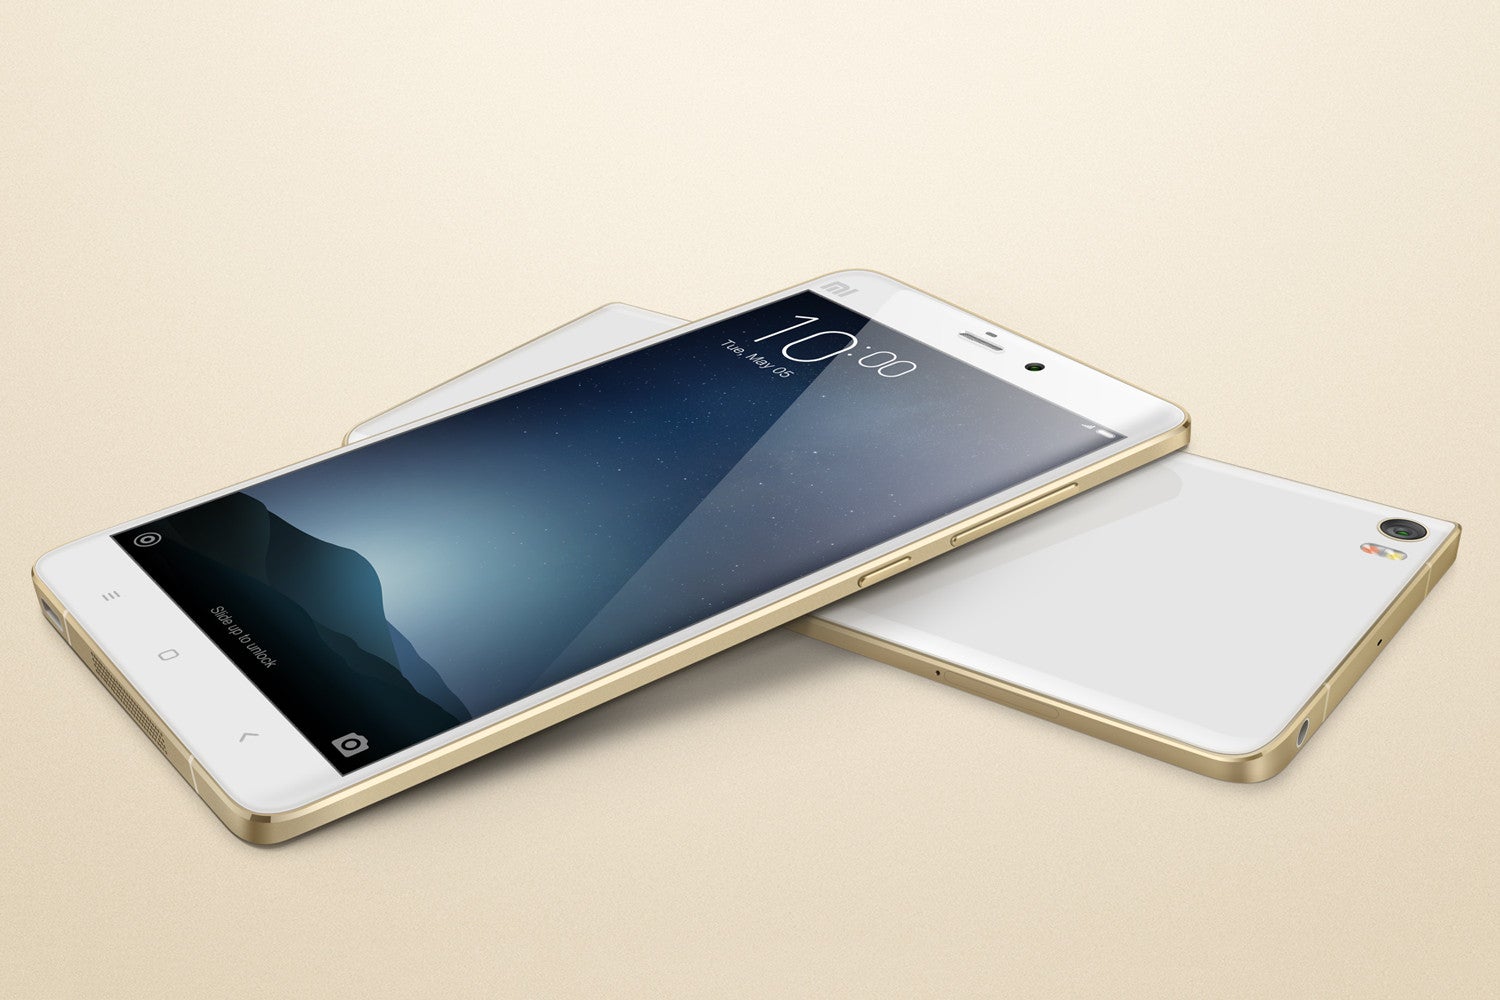 The new Xiaomi Mi Note 2 reportedly sold out in China over the course of 50 seconds